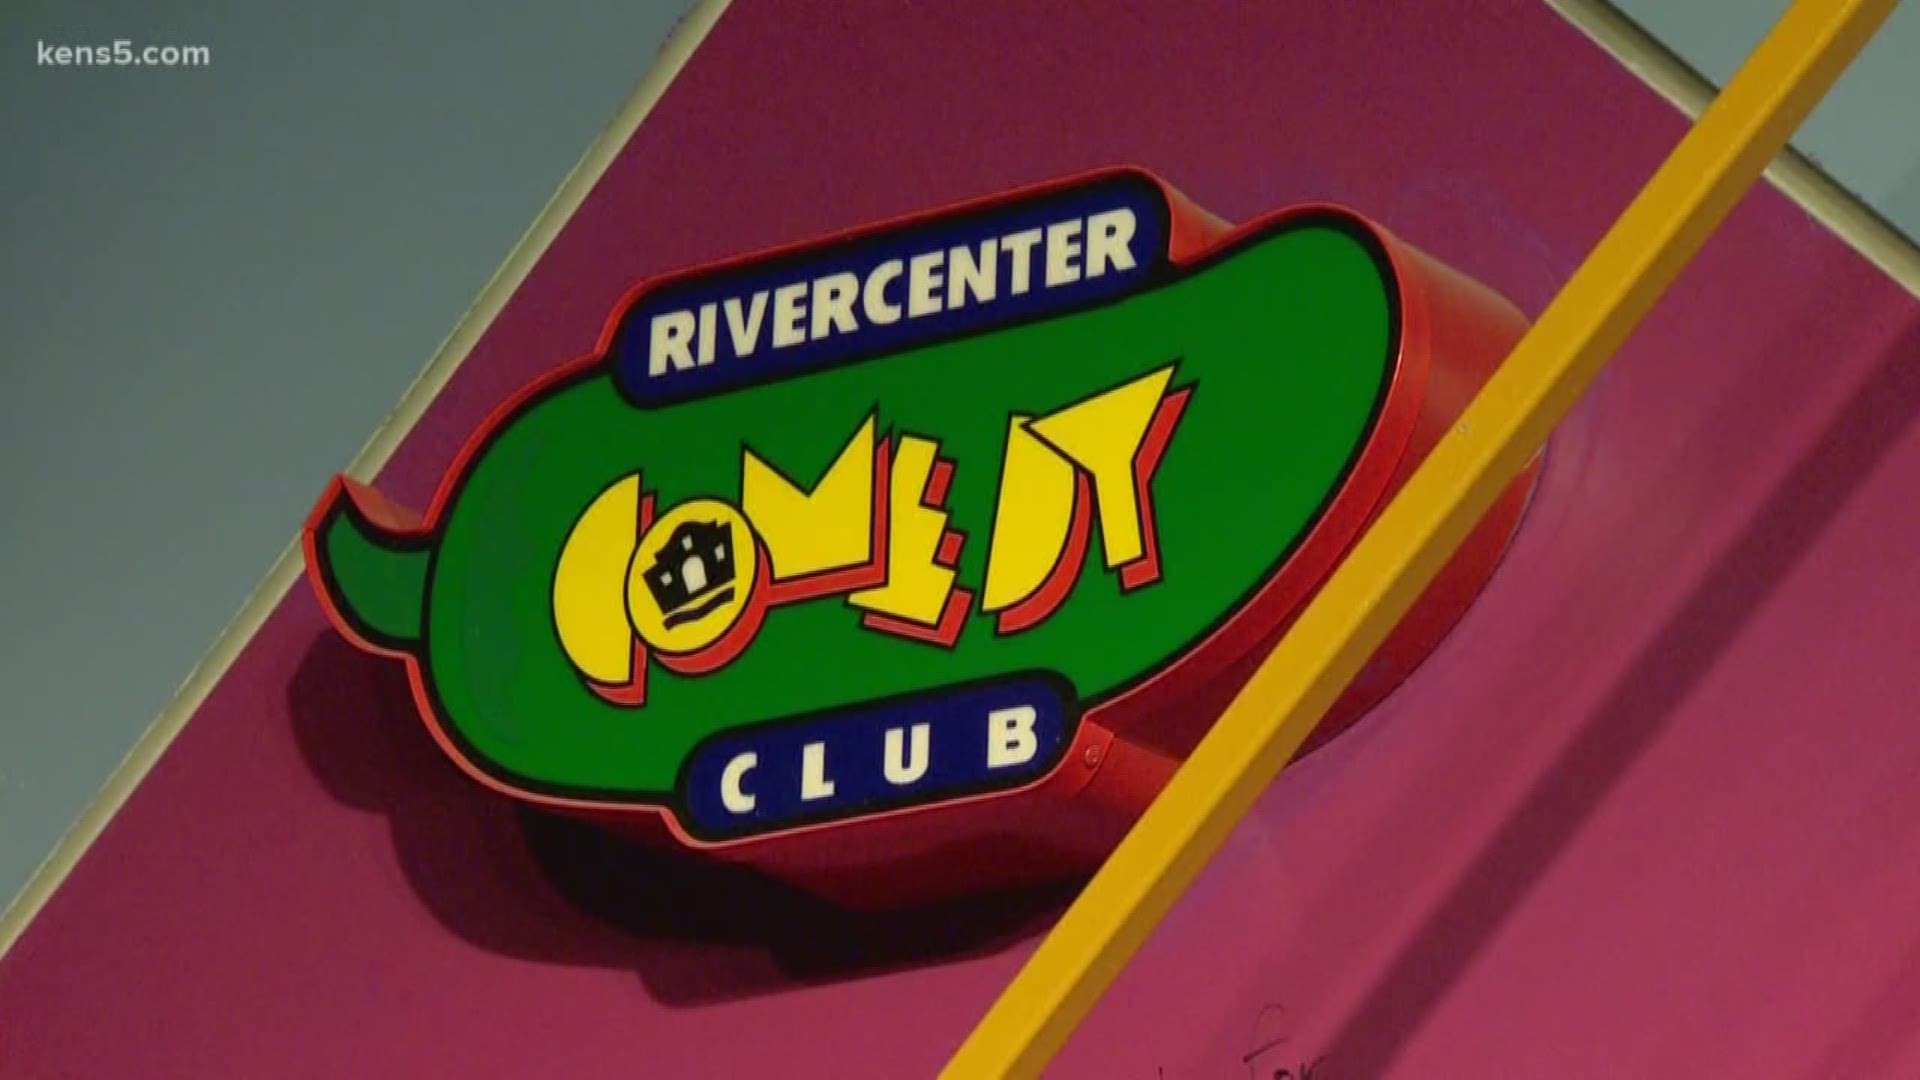 San Antonio's improv comedy club at Rivercenter is closed for business. The club located at the Rivercenter mall has hosted huge comedians and kick-started local careers. Eyewitness News reporter Henry Ramos joins us now.